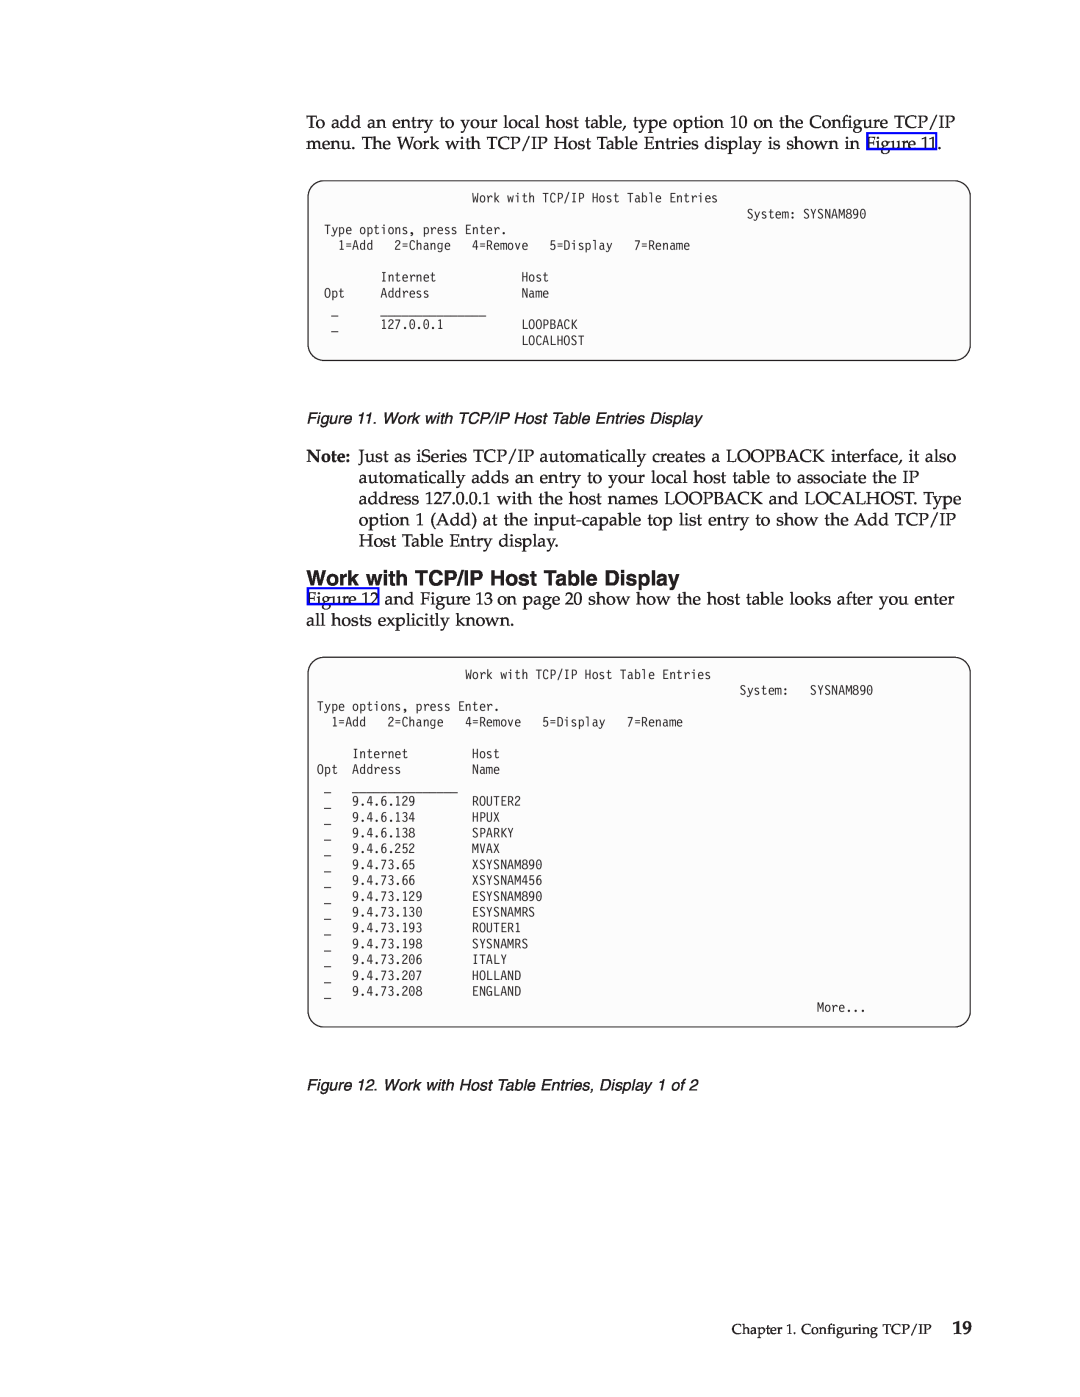 IBM SC41-5420-04 manual Work with TCP/IP Host Table Display 